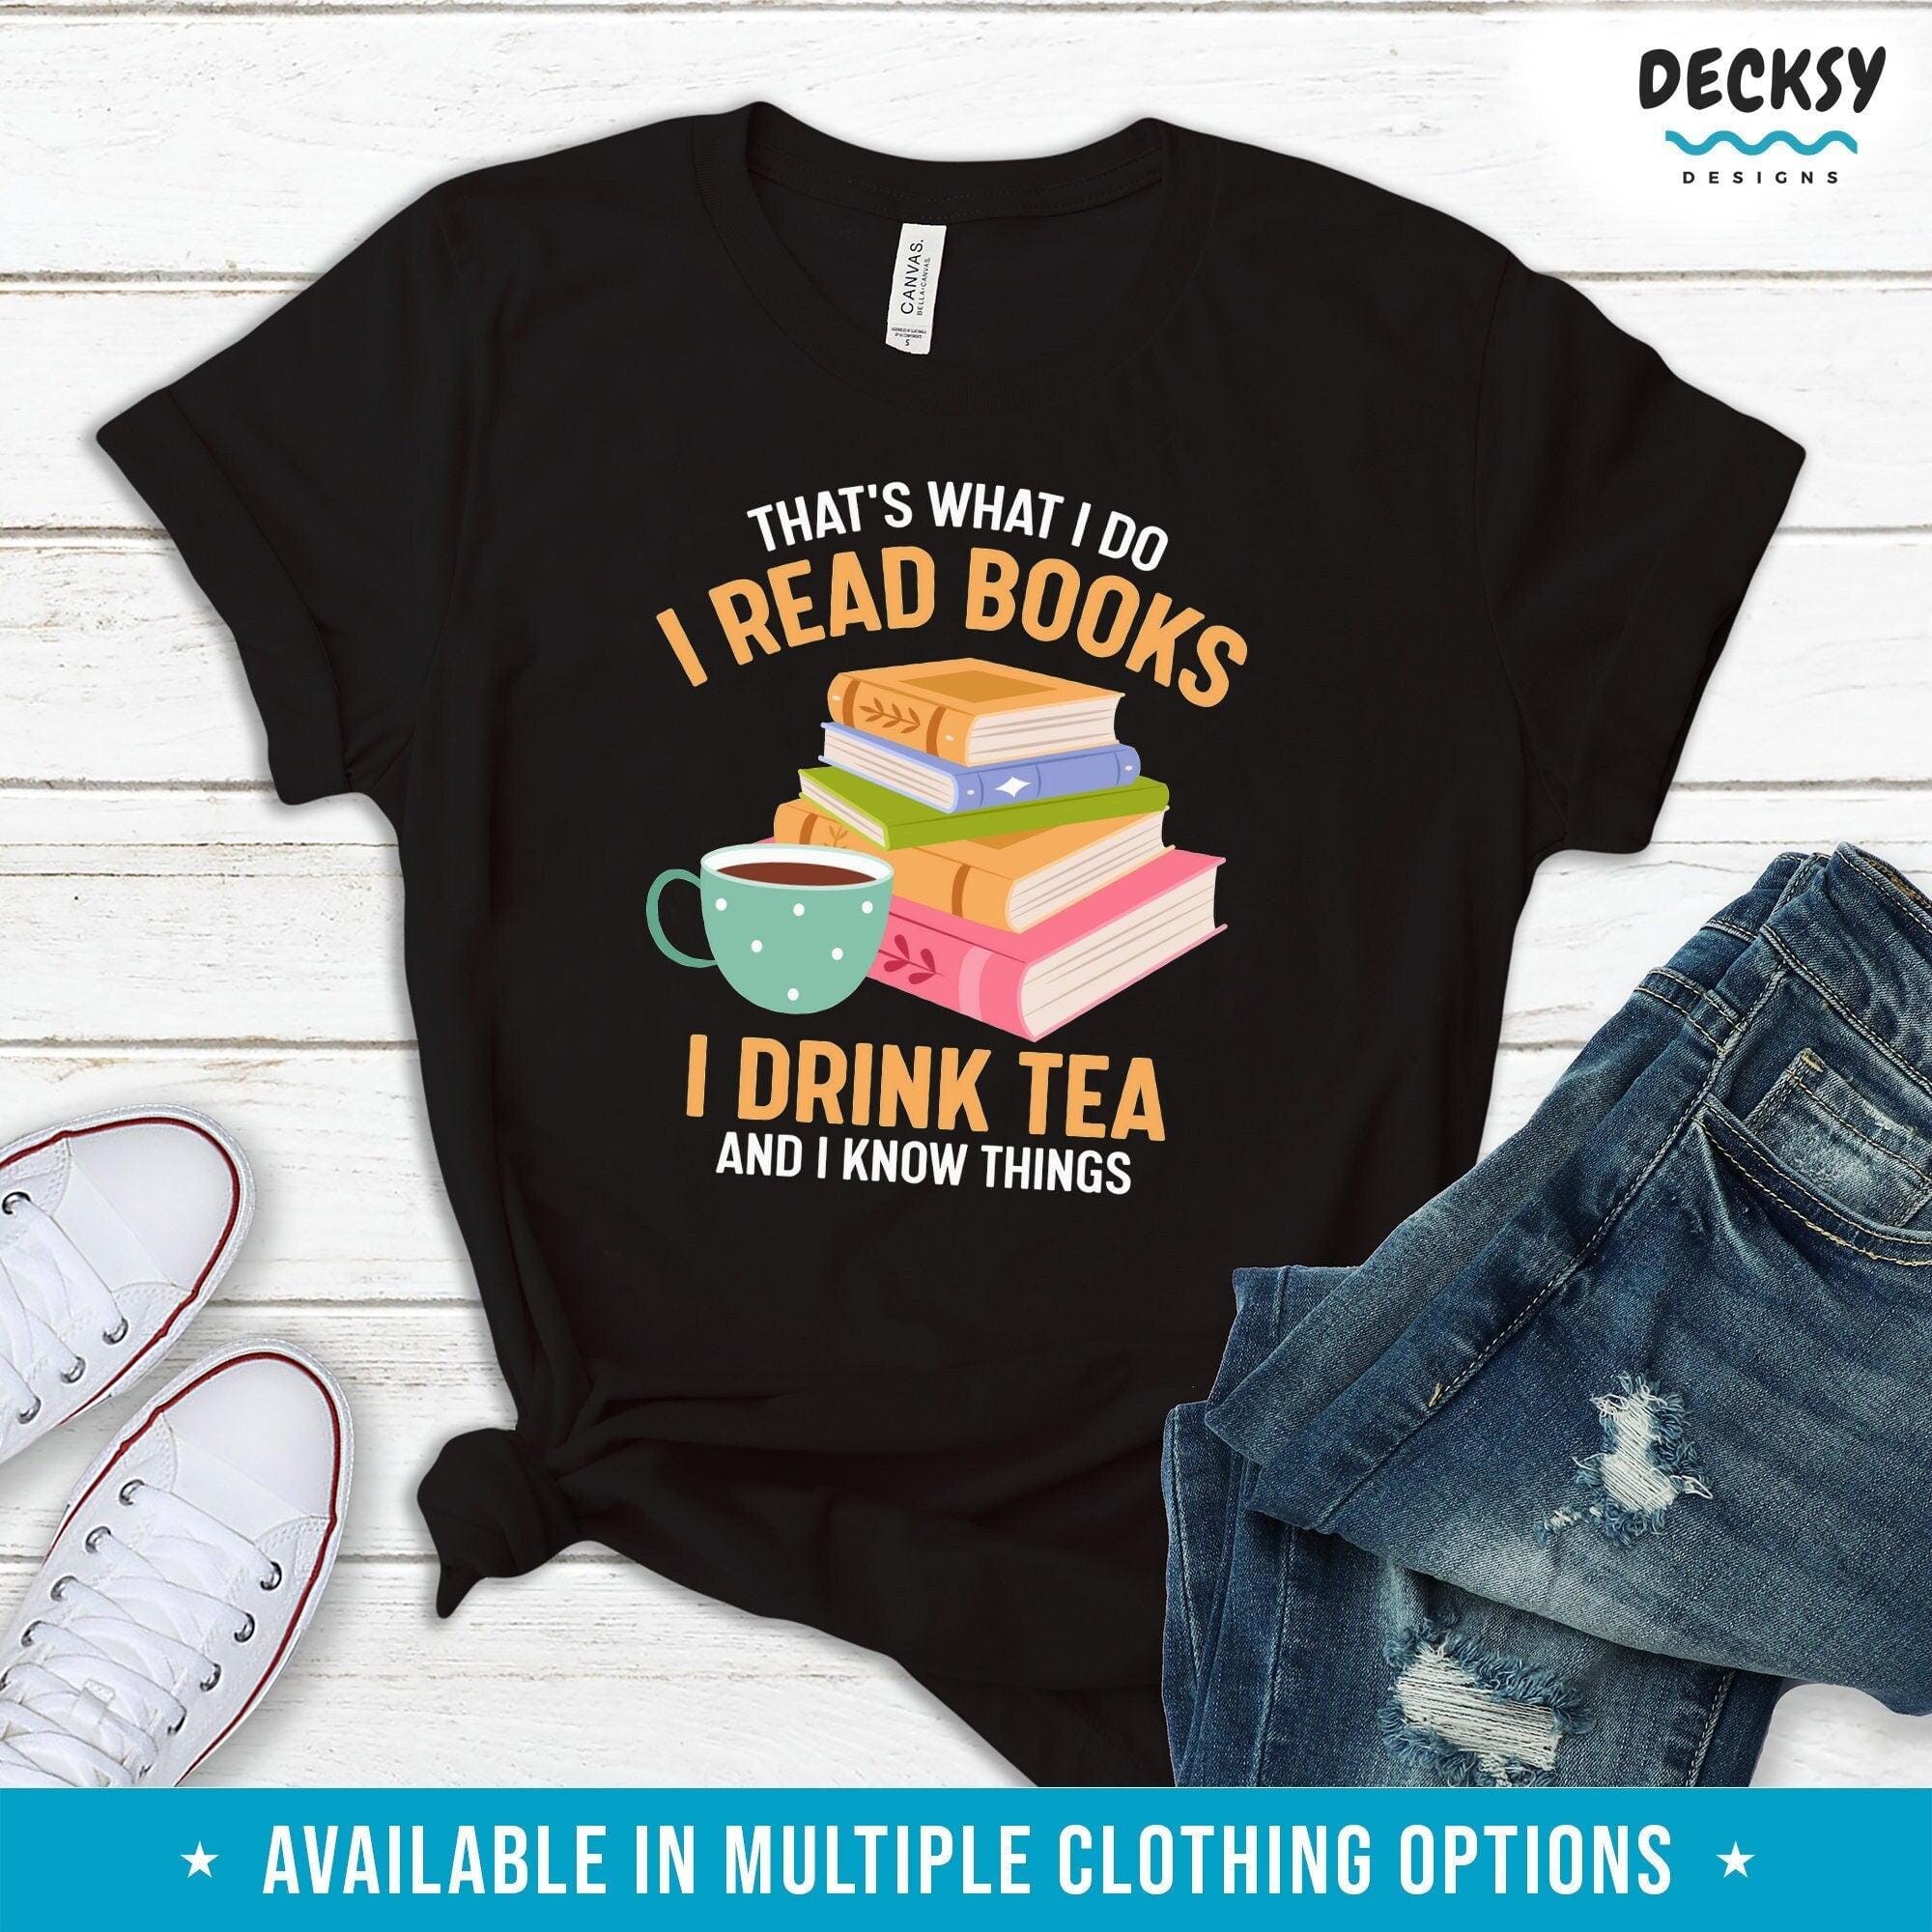 Book Lover Shirt, Gift For Tea Lover-Clothing:Gender-Neutral Adult Clothing:Tops & Tees:T-shirts:Graphic Tees-DecksyDesigns